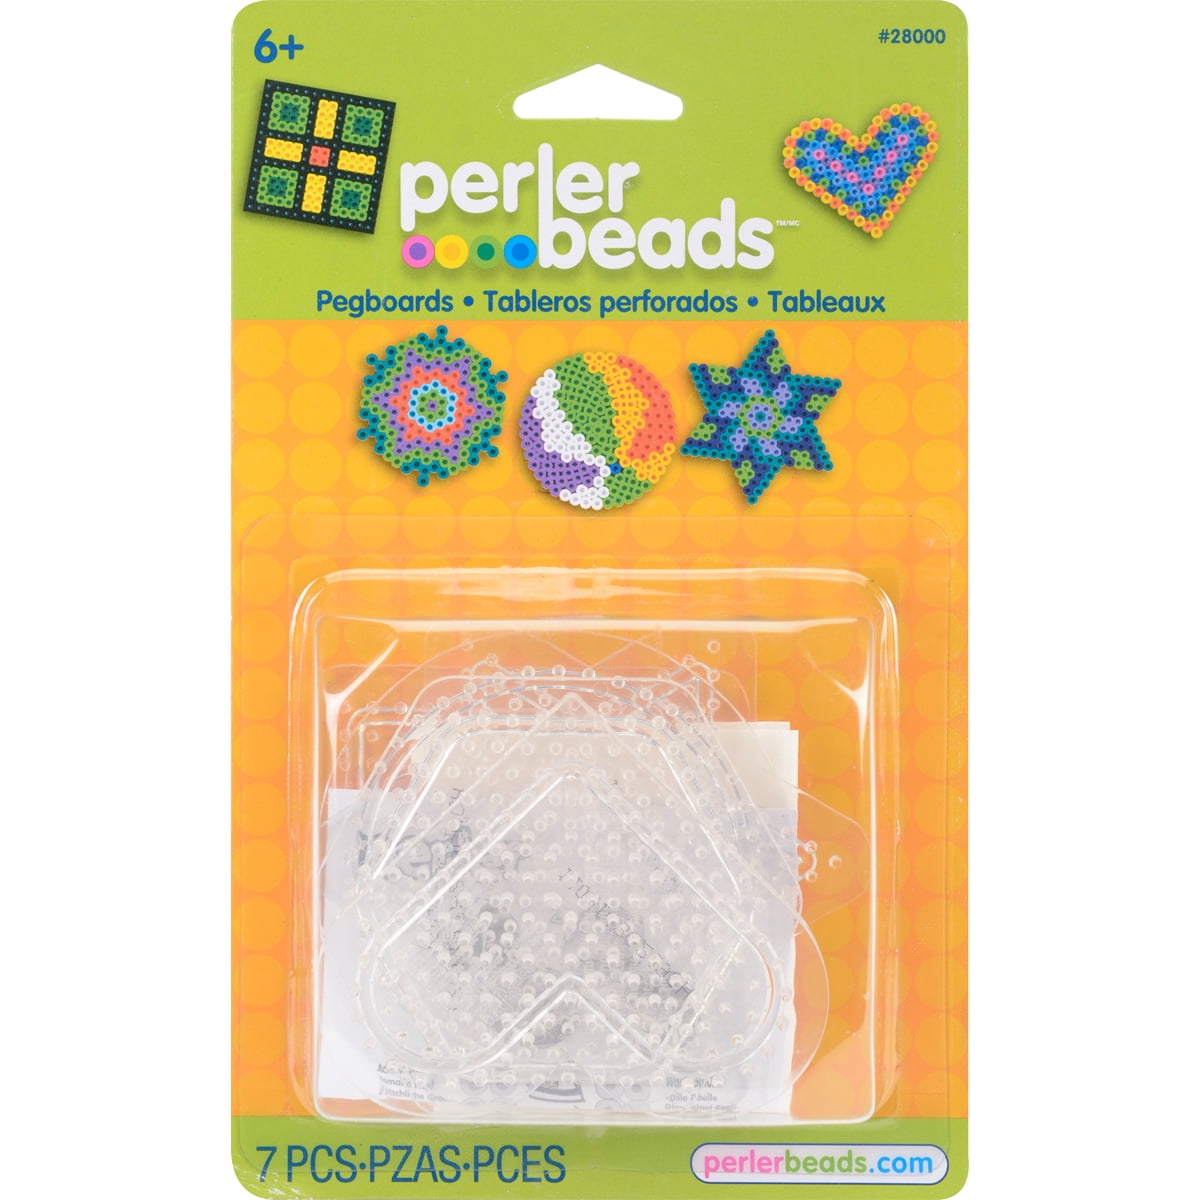 Perler Beads Large Square Pegboards for Kids Crafts, 4 pcs